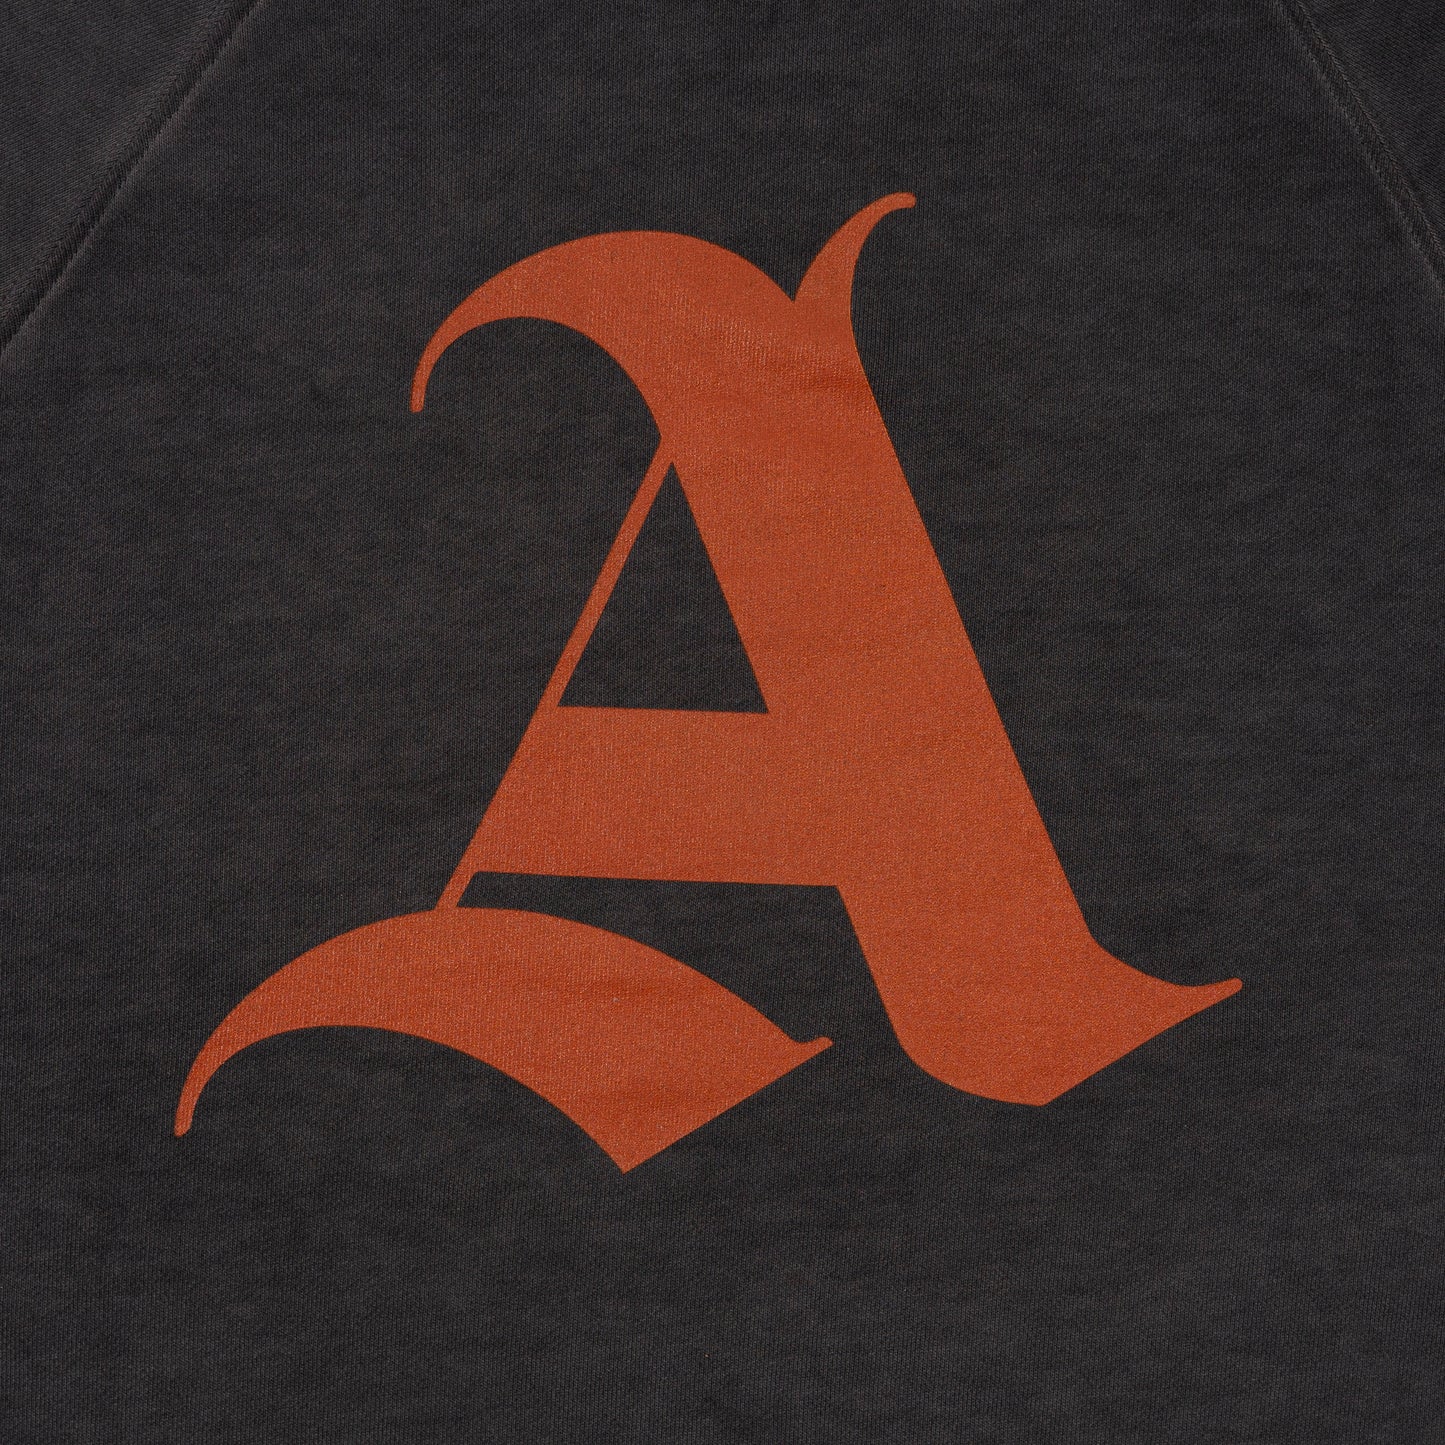 Detail View of Printed Signature 'A' Logo design on August Pullover Sweatshirt by Aseye Studio